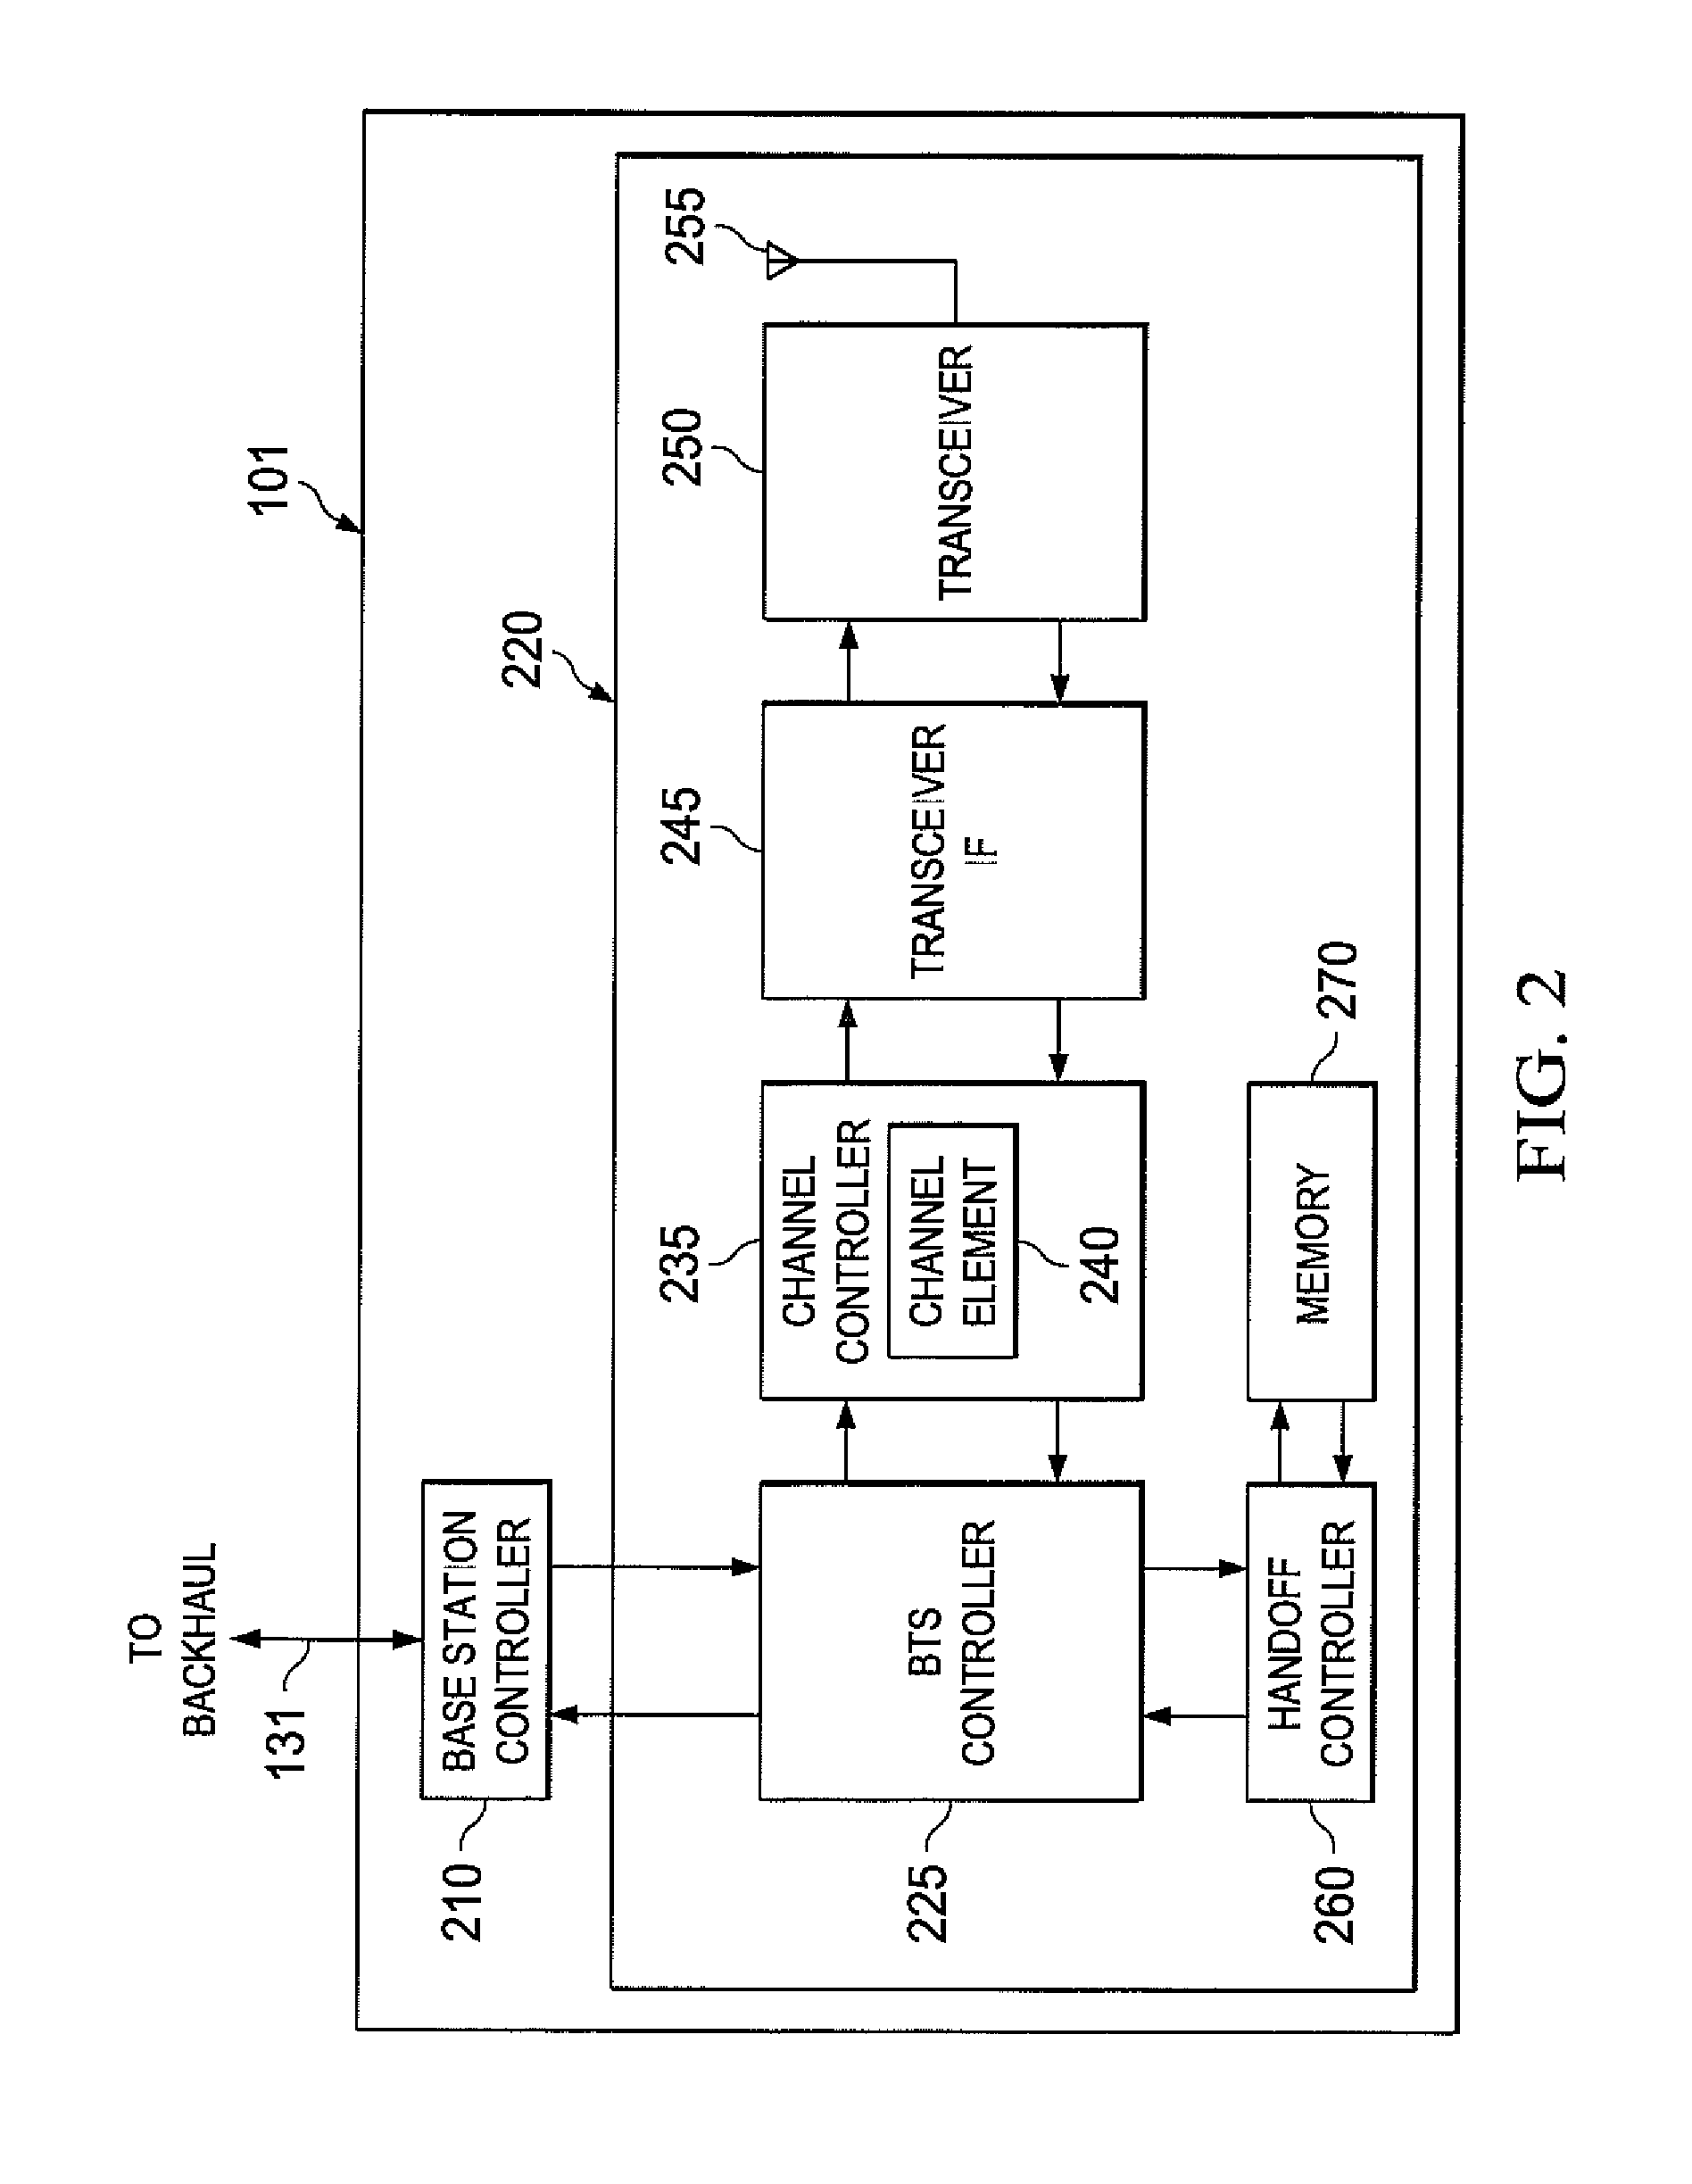 Methods and apparatus to support interference management in multi-tier wireless communication systems